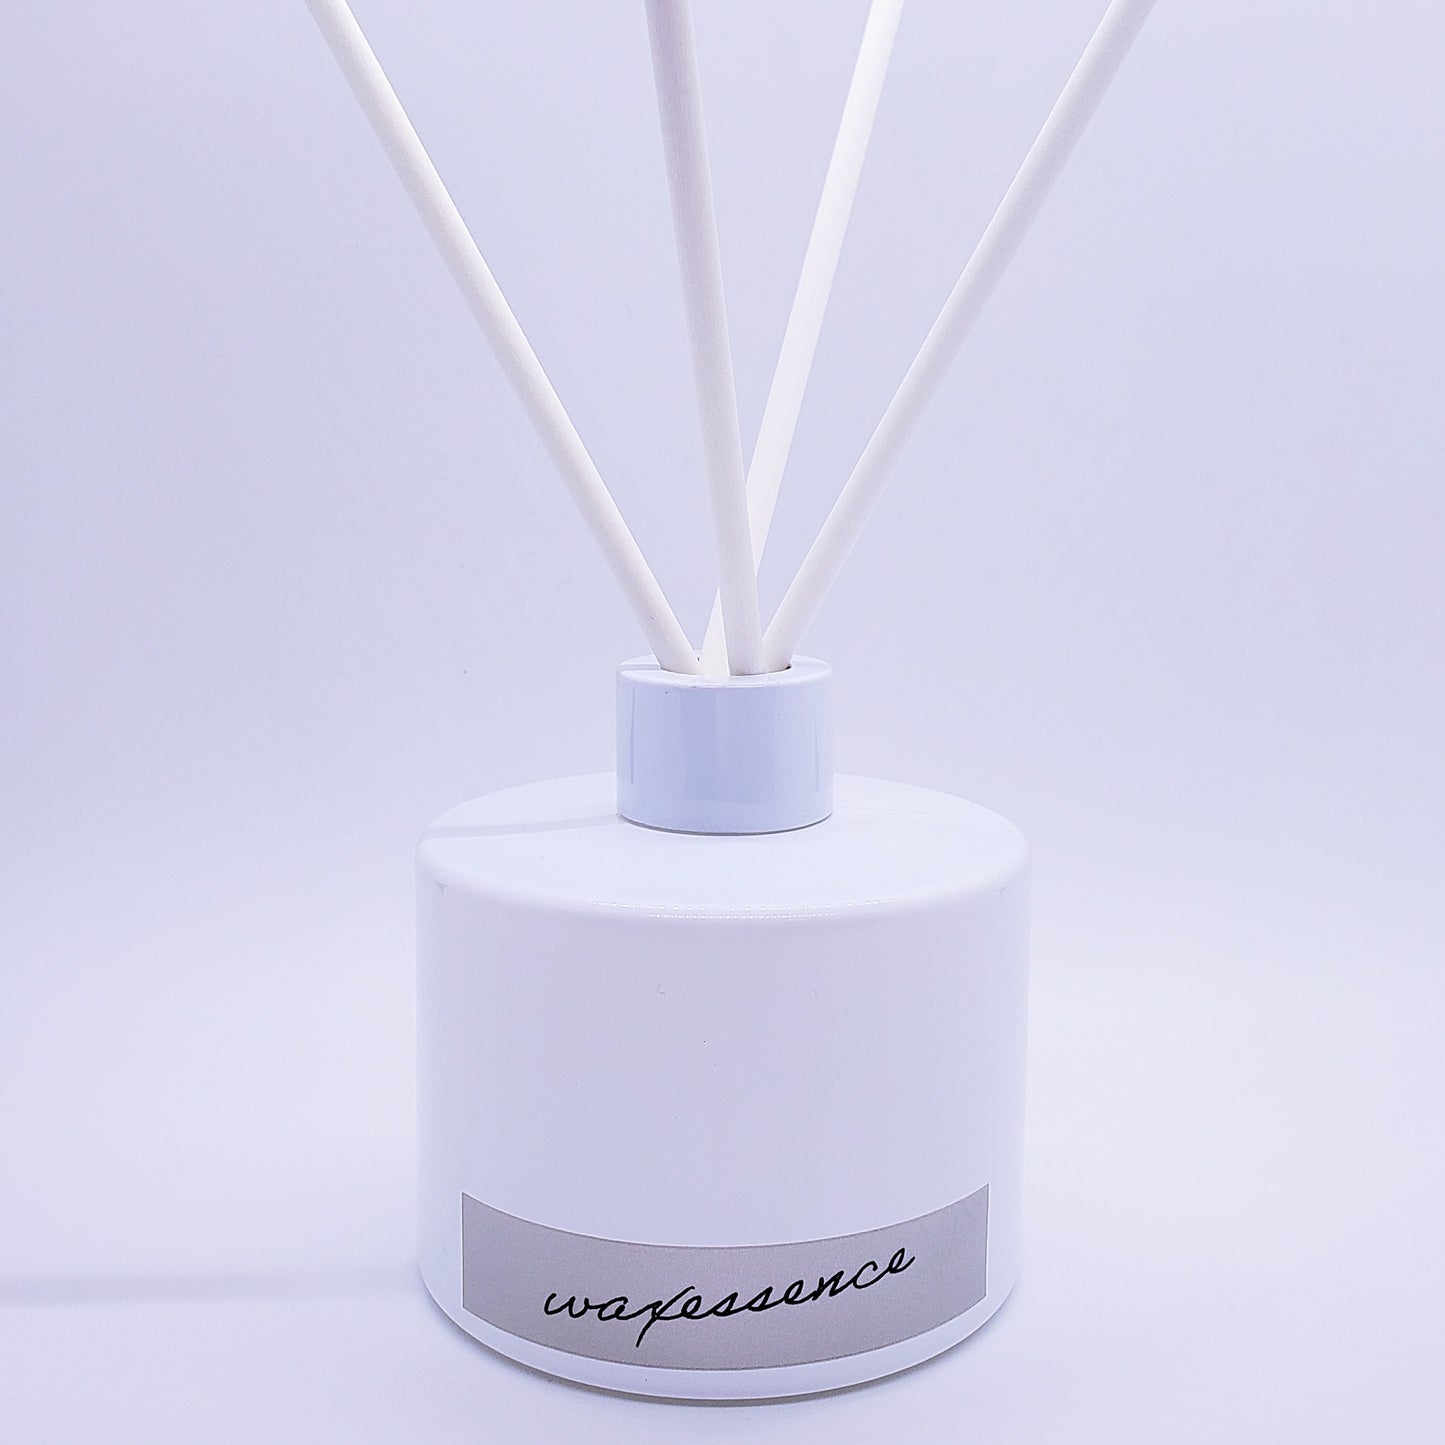 Reed diffusers are a simple, low maintenance, and flame-free way to fill a space continuously with fragrance. Revitalize any room in your home with the amazing aroma of this Oil Diffuser from WaxEssence.